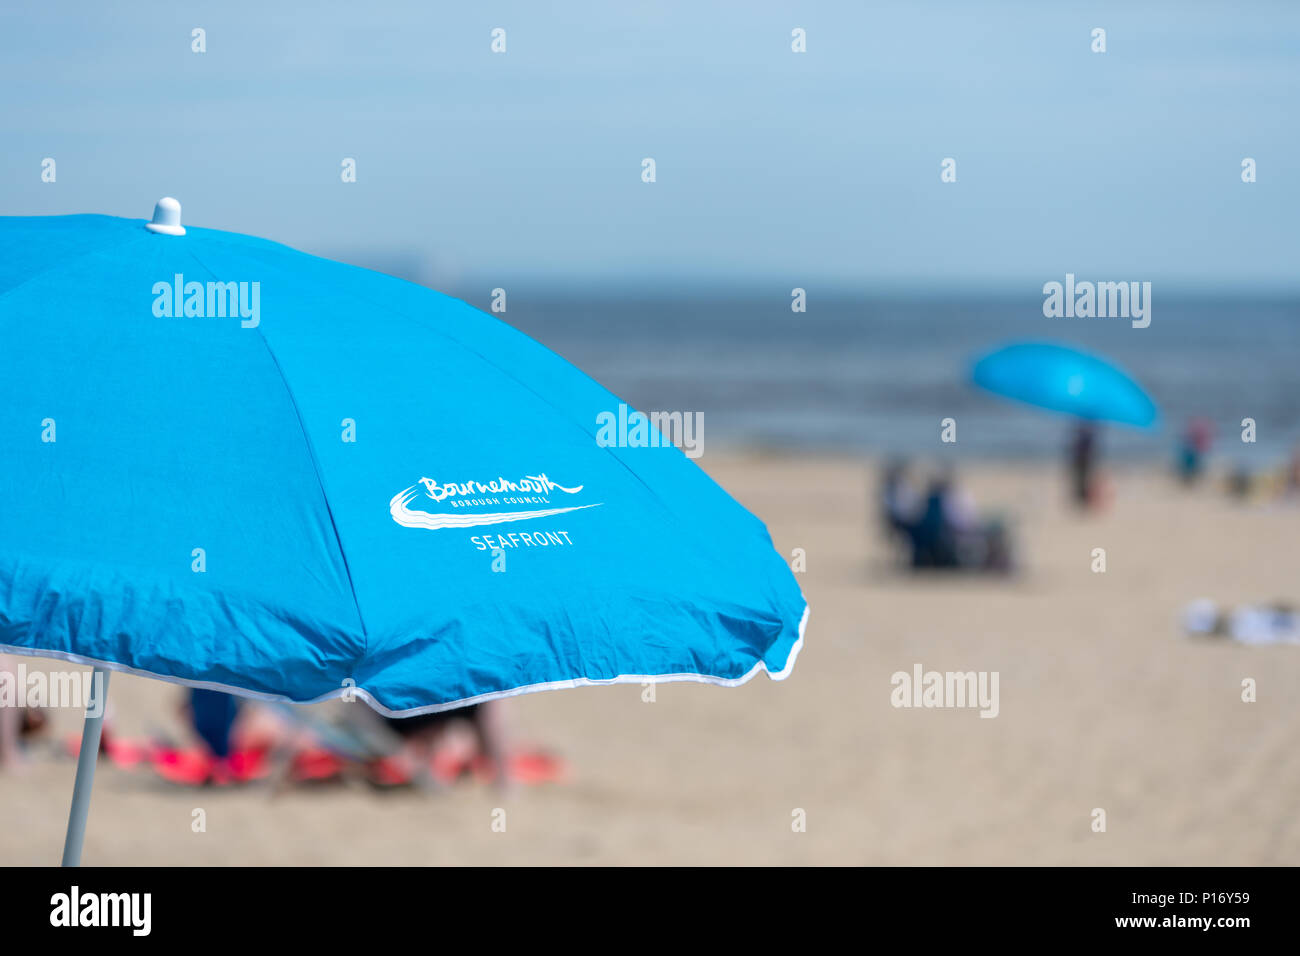 Bournemouth, UK. 11th June 2018. Beach parasol on Bournemouth beach and seafront. Credit: Thomas Faull/Alamy Live News Stock Photo